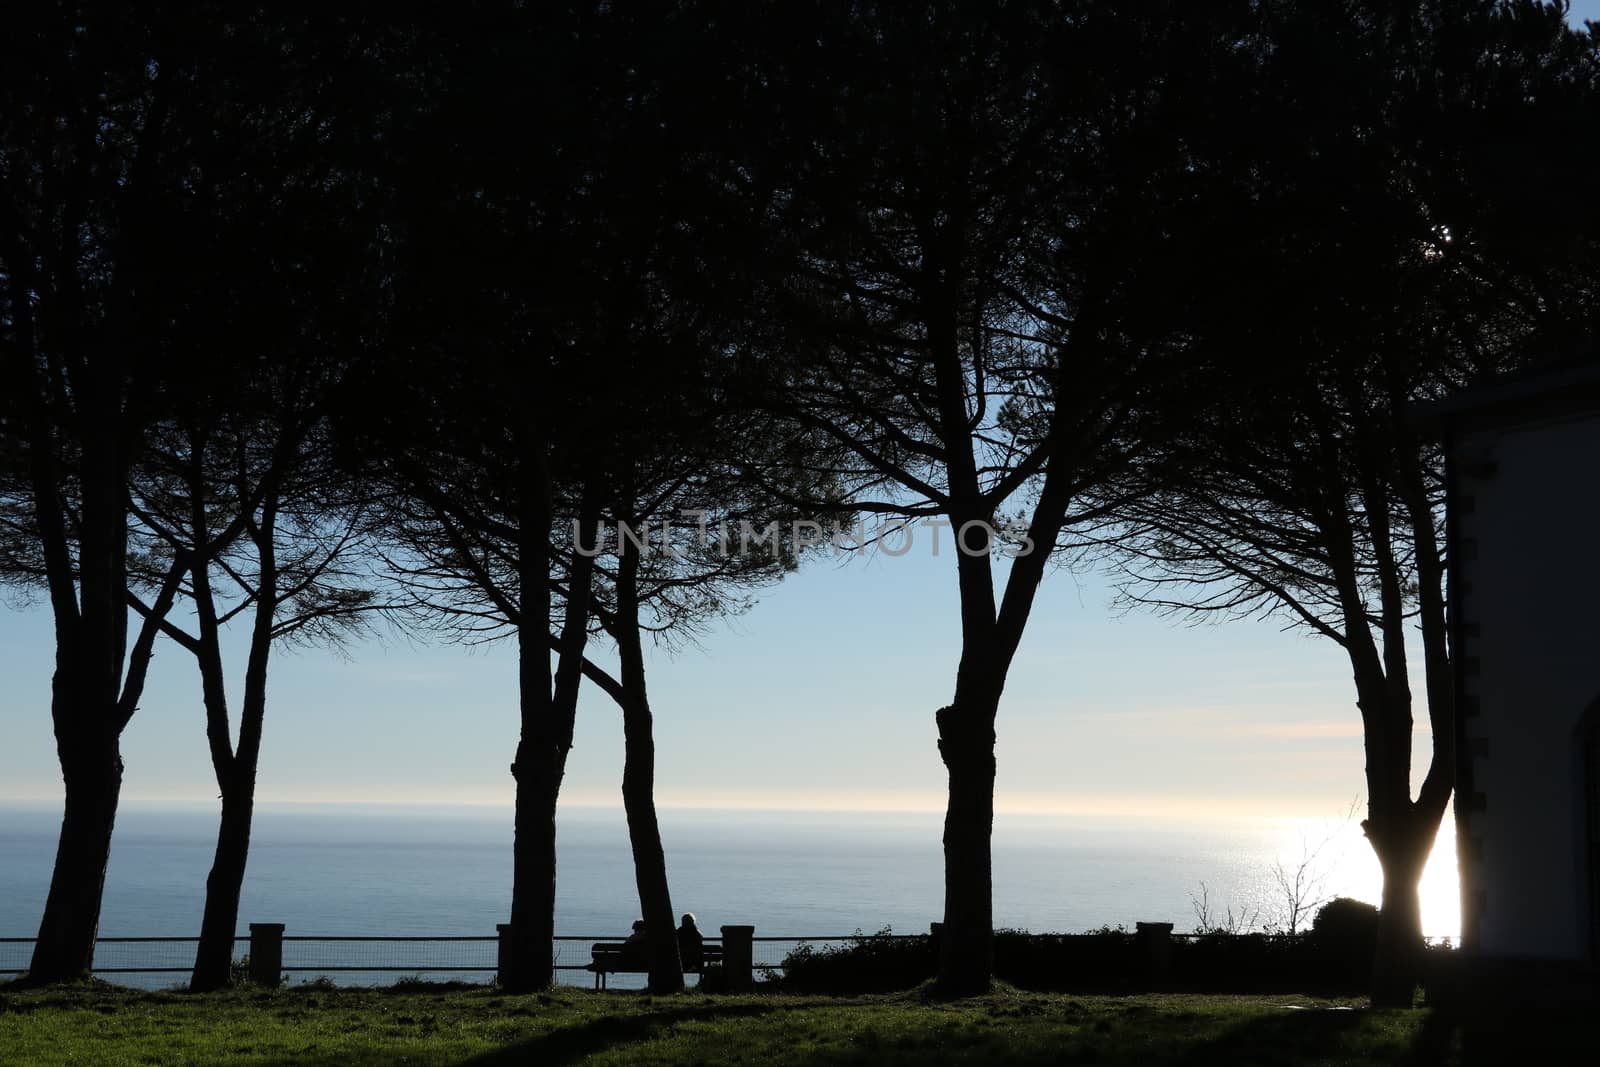 Panorama of the Cinque Terre sea seen from the hill of the sanctuary of Soviore. Silouette of pines and deu people sitting on a bench.